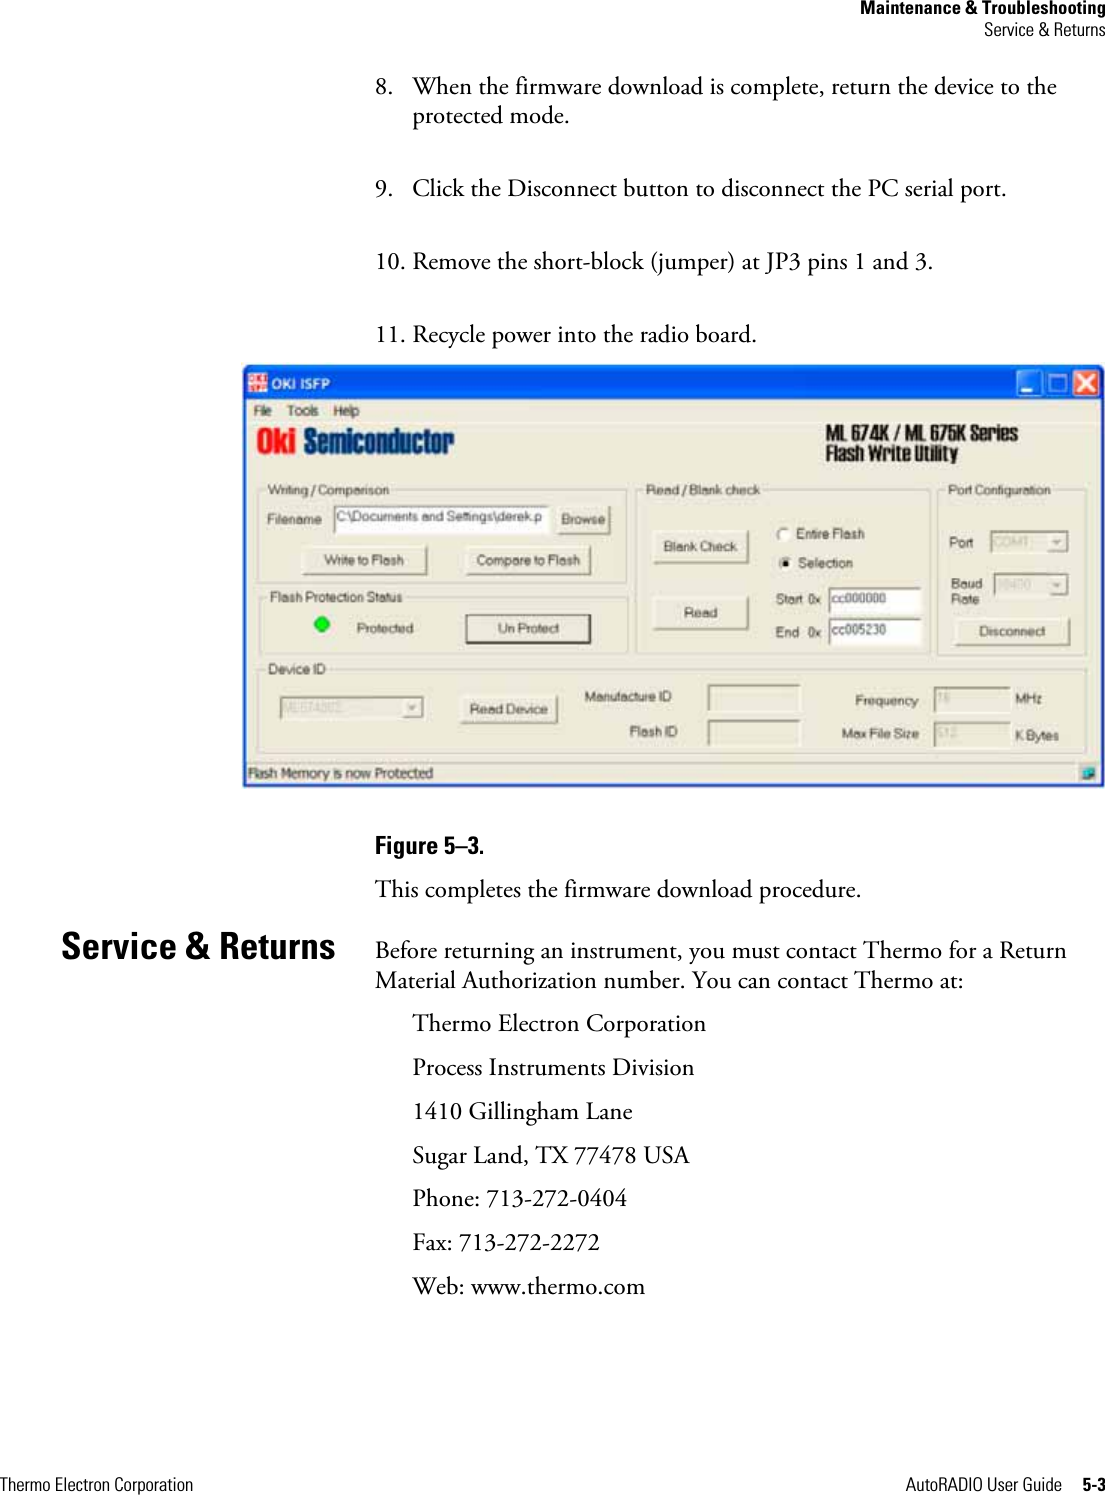 Maintenance &amp; Troubleshooting Service &amp; Returns Thermo Electron Corporation  AutoRADIO User Guide     5-3 8. When the firmware download is complete, return the device to the protected mode. 9. Click the Disconnect button to disconnect the PC serial port. 10. Remove the short-block (jumper) at JP3 pins 1 and 3. 11. Recycle power into the radio board.  Figure 5–3.  This completes the firmware download procedure.  Before returning an instrument, you must contact Thermo for a Return Material Authorization number. You can contact Thermo at: Thermo Electron Corporation Process Instruments Division 1410 Gillingham Lane Sugar Land, TX 77478 USA Phone: 713-272-0404 Fax: 713-272-2272 Web: www.thermo.com   Service &amp; Returns 